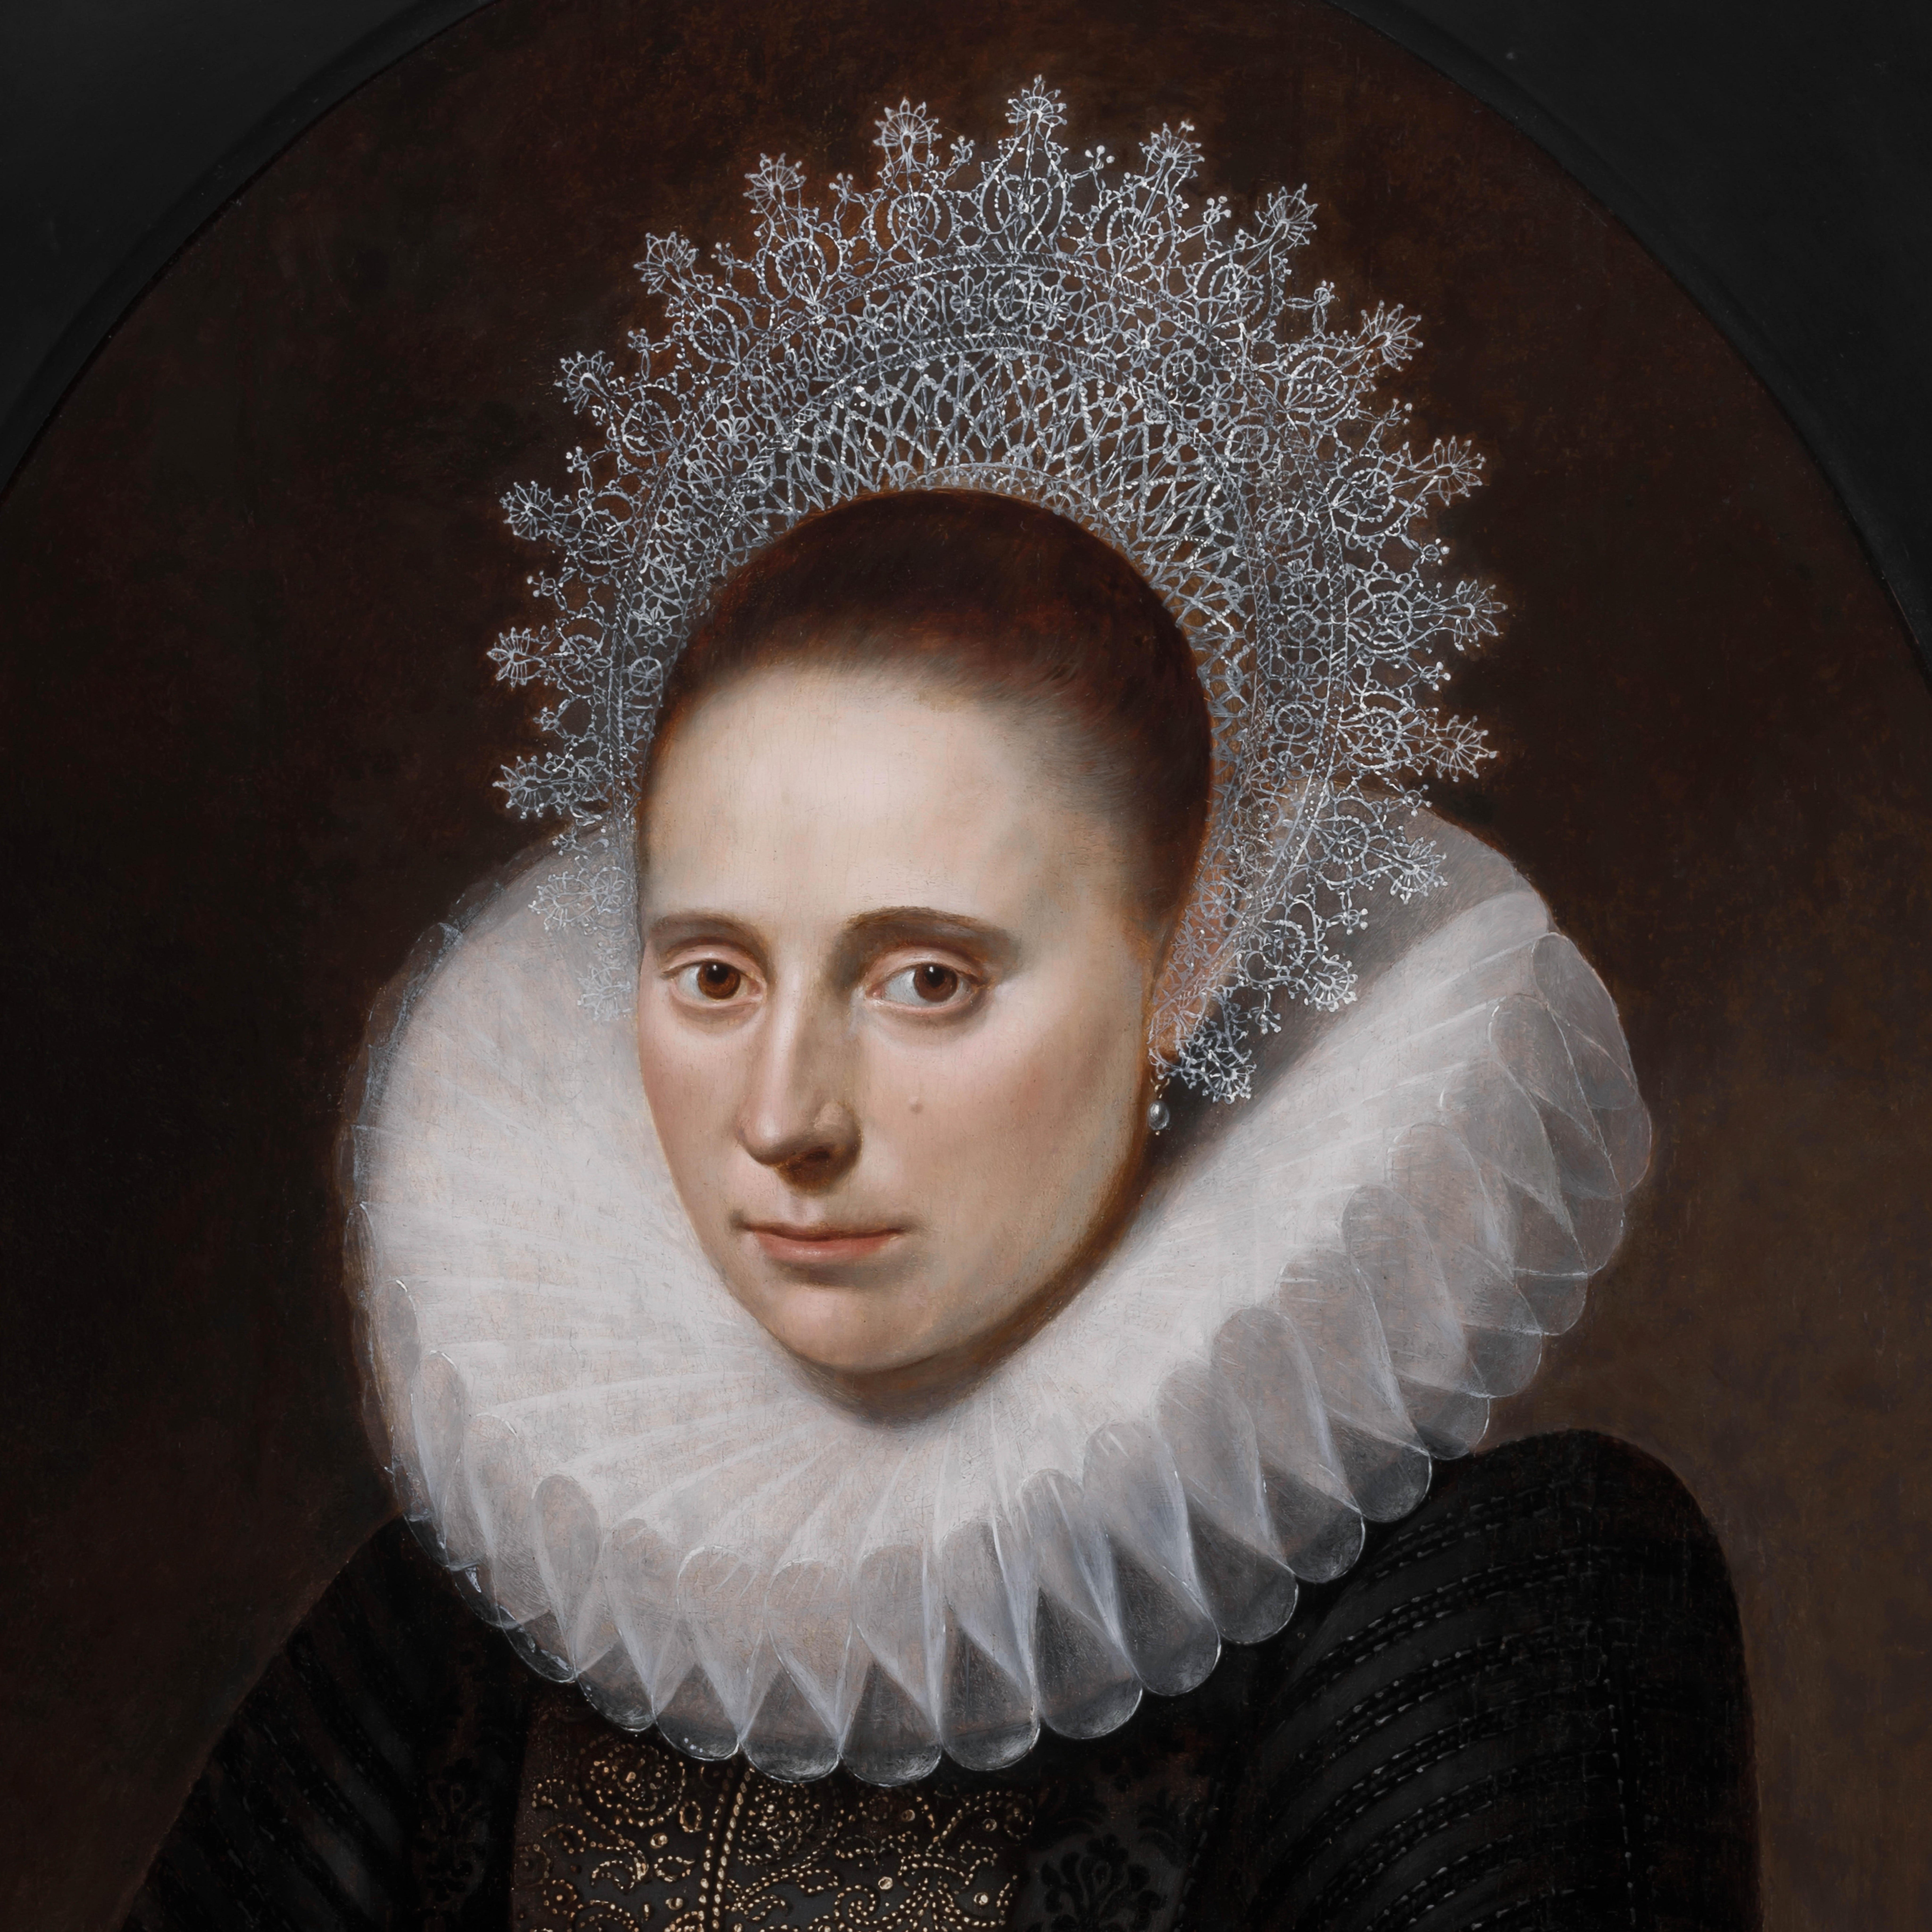 Portrait of a Lady in an Elaborate Ruff & Lace Coif c.1610-20, Dutch Old Master For Sale 1